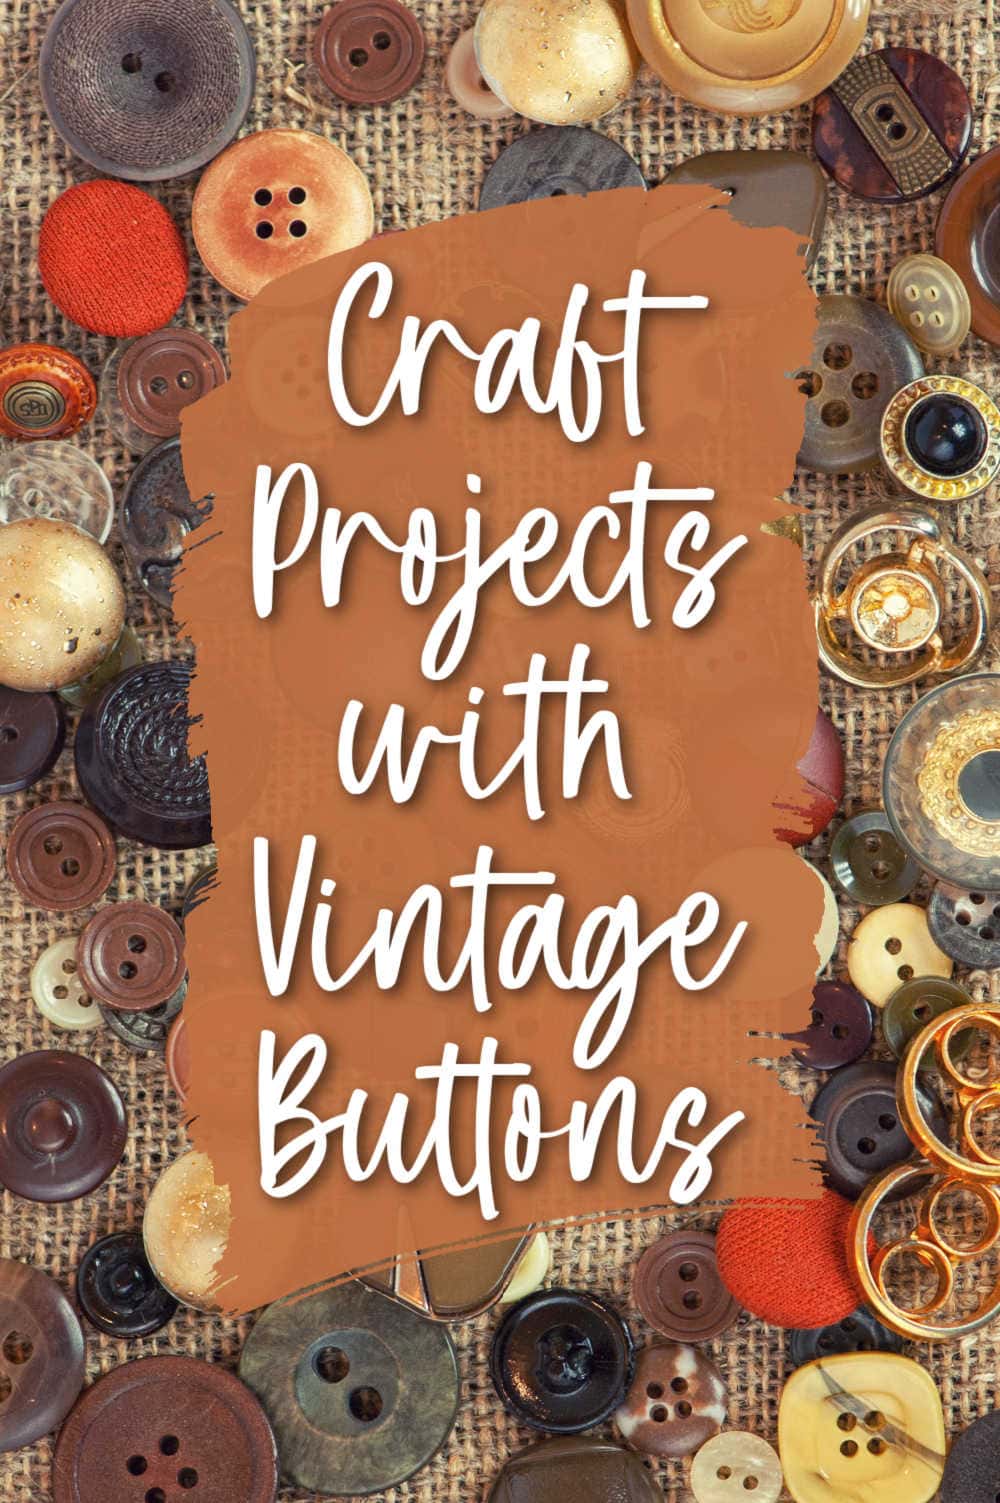 upcycle ideas for buttons